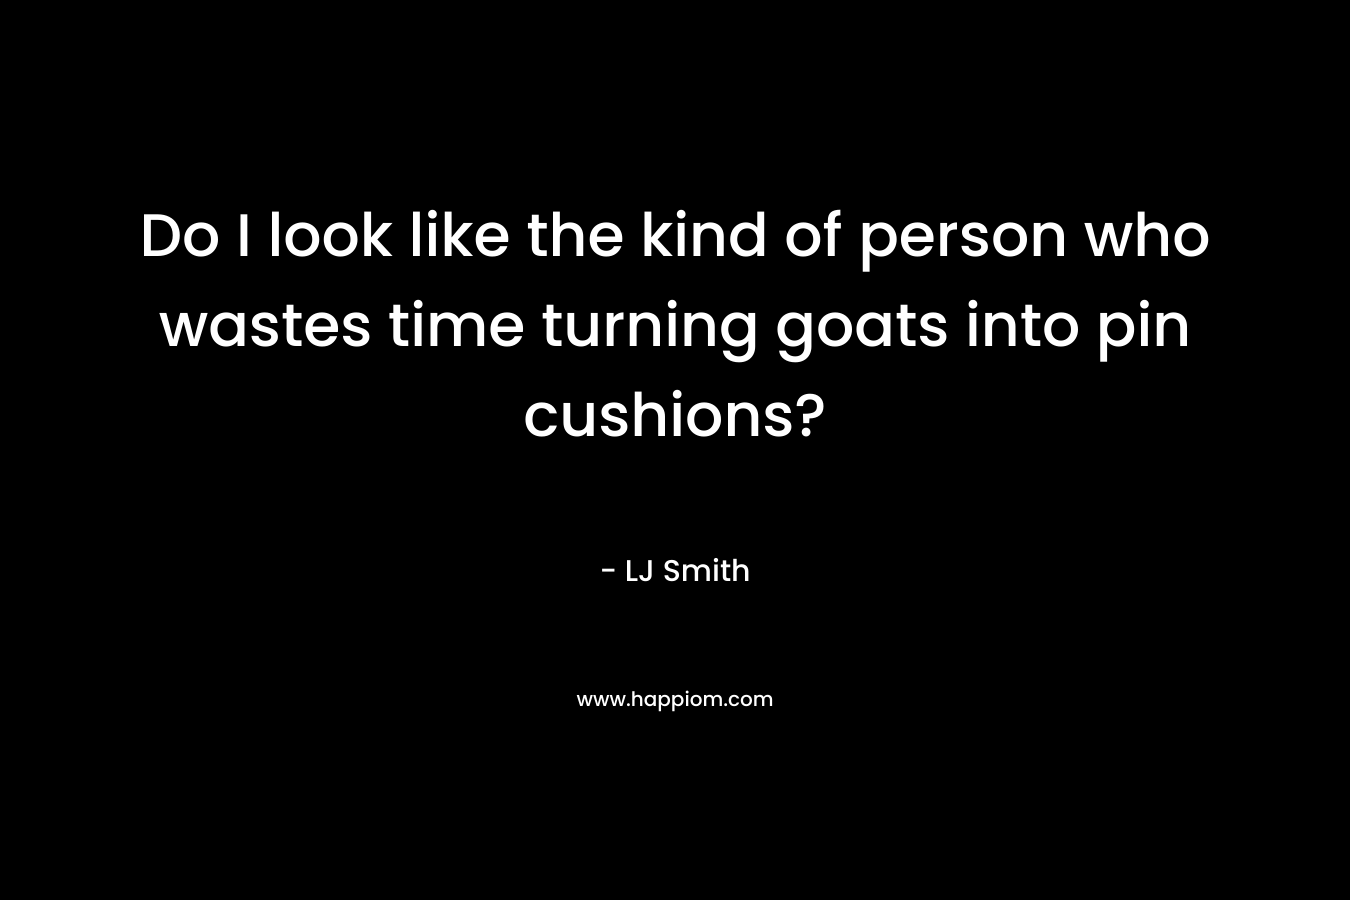 Do I look like the kind of person who wastes time turning goats into pin cushions?